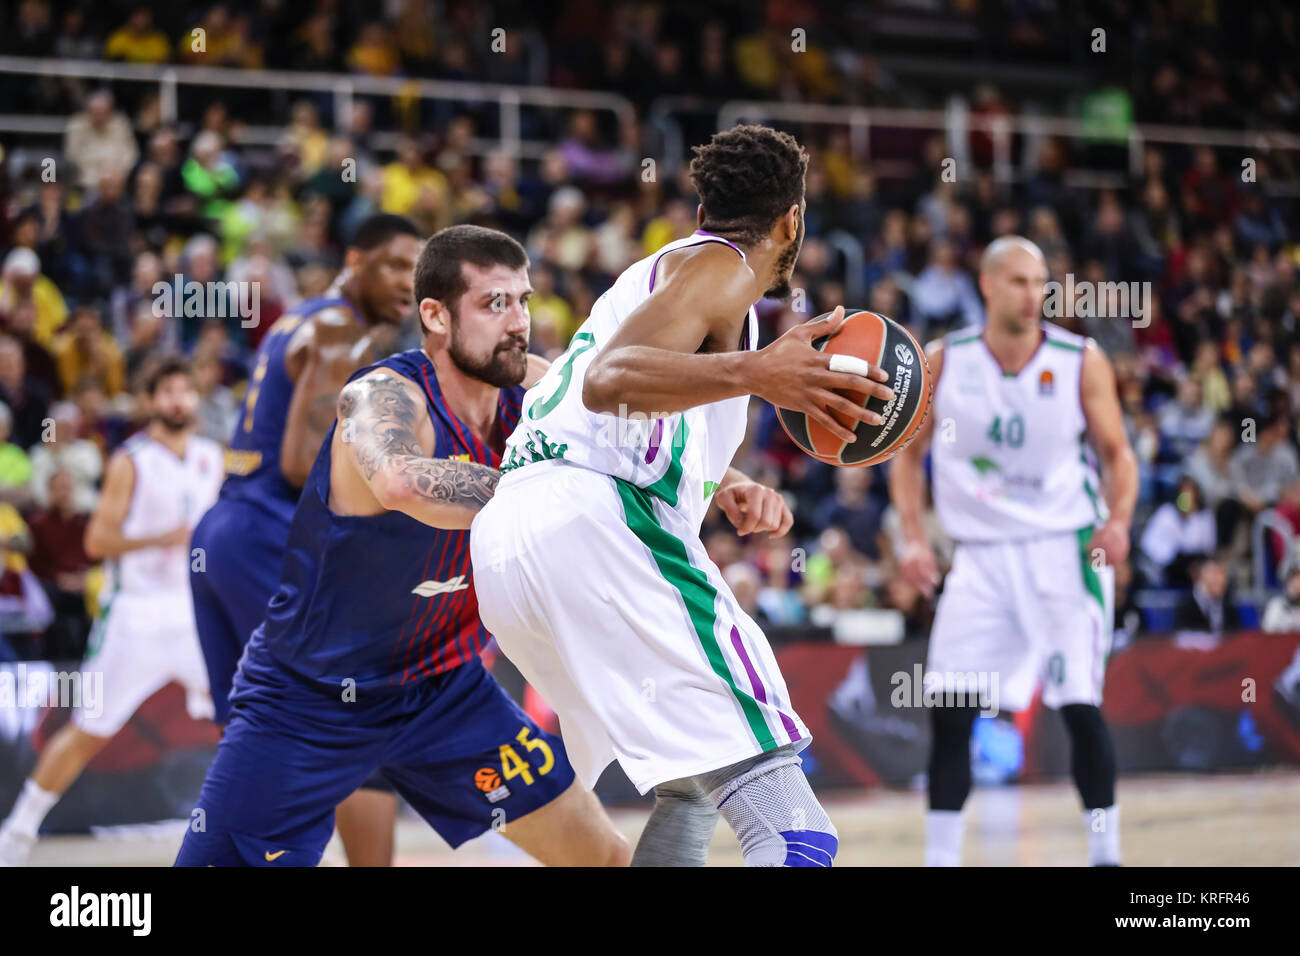 Adrien Moerman during the match between FC Barcelona Lassa against Unicaja Malaga, for the round 13 of Euroleague, played at Palau Blaugrana on 20th December 2017 in Barcelona, Spain. (Credit: GTO/Urbanandsport / Gtres Online) Stock Photo